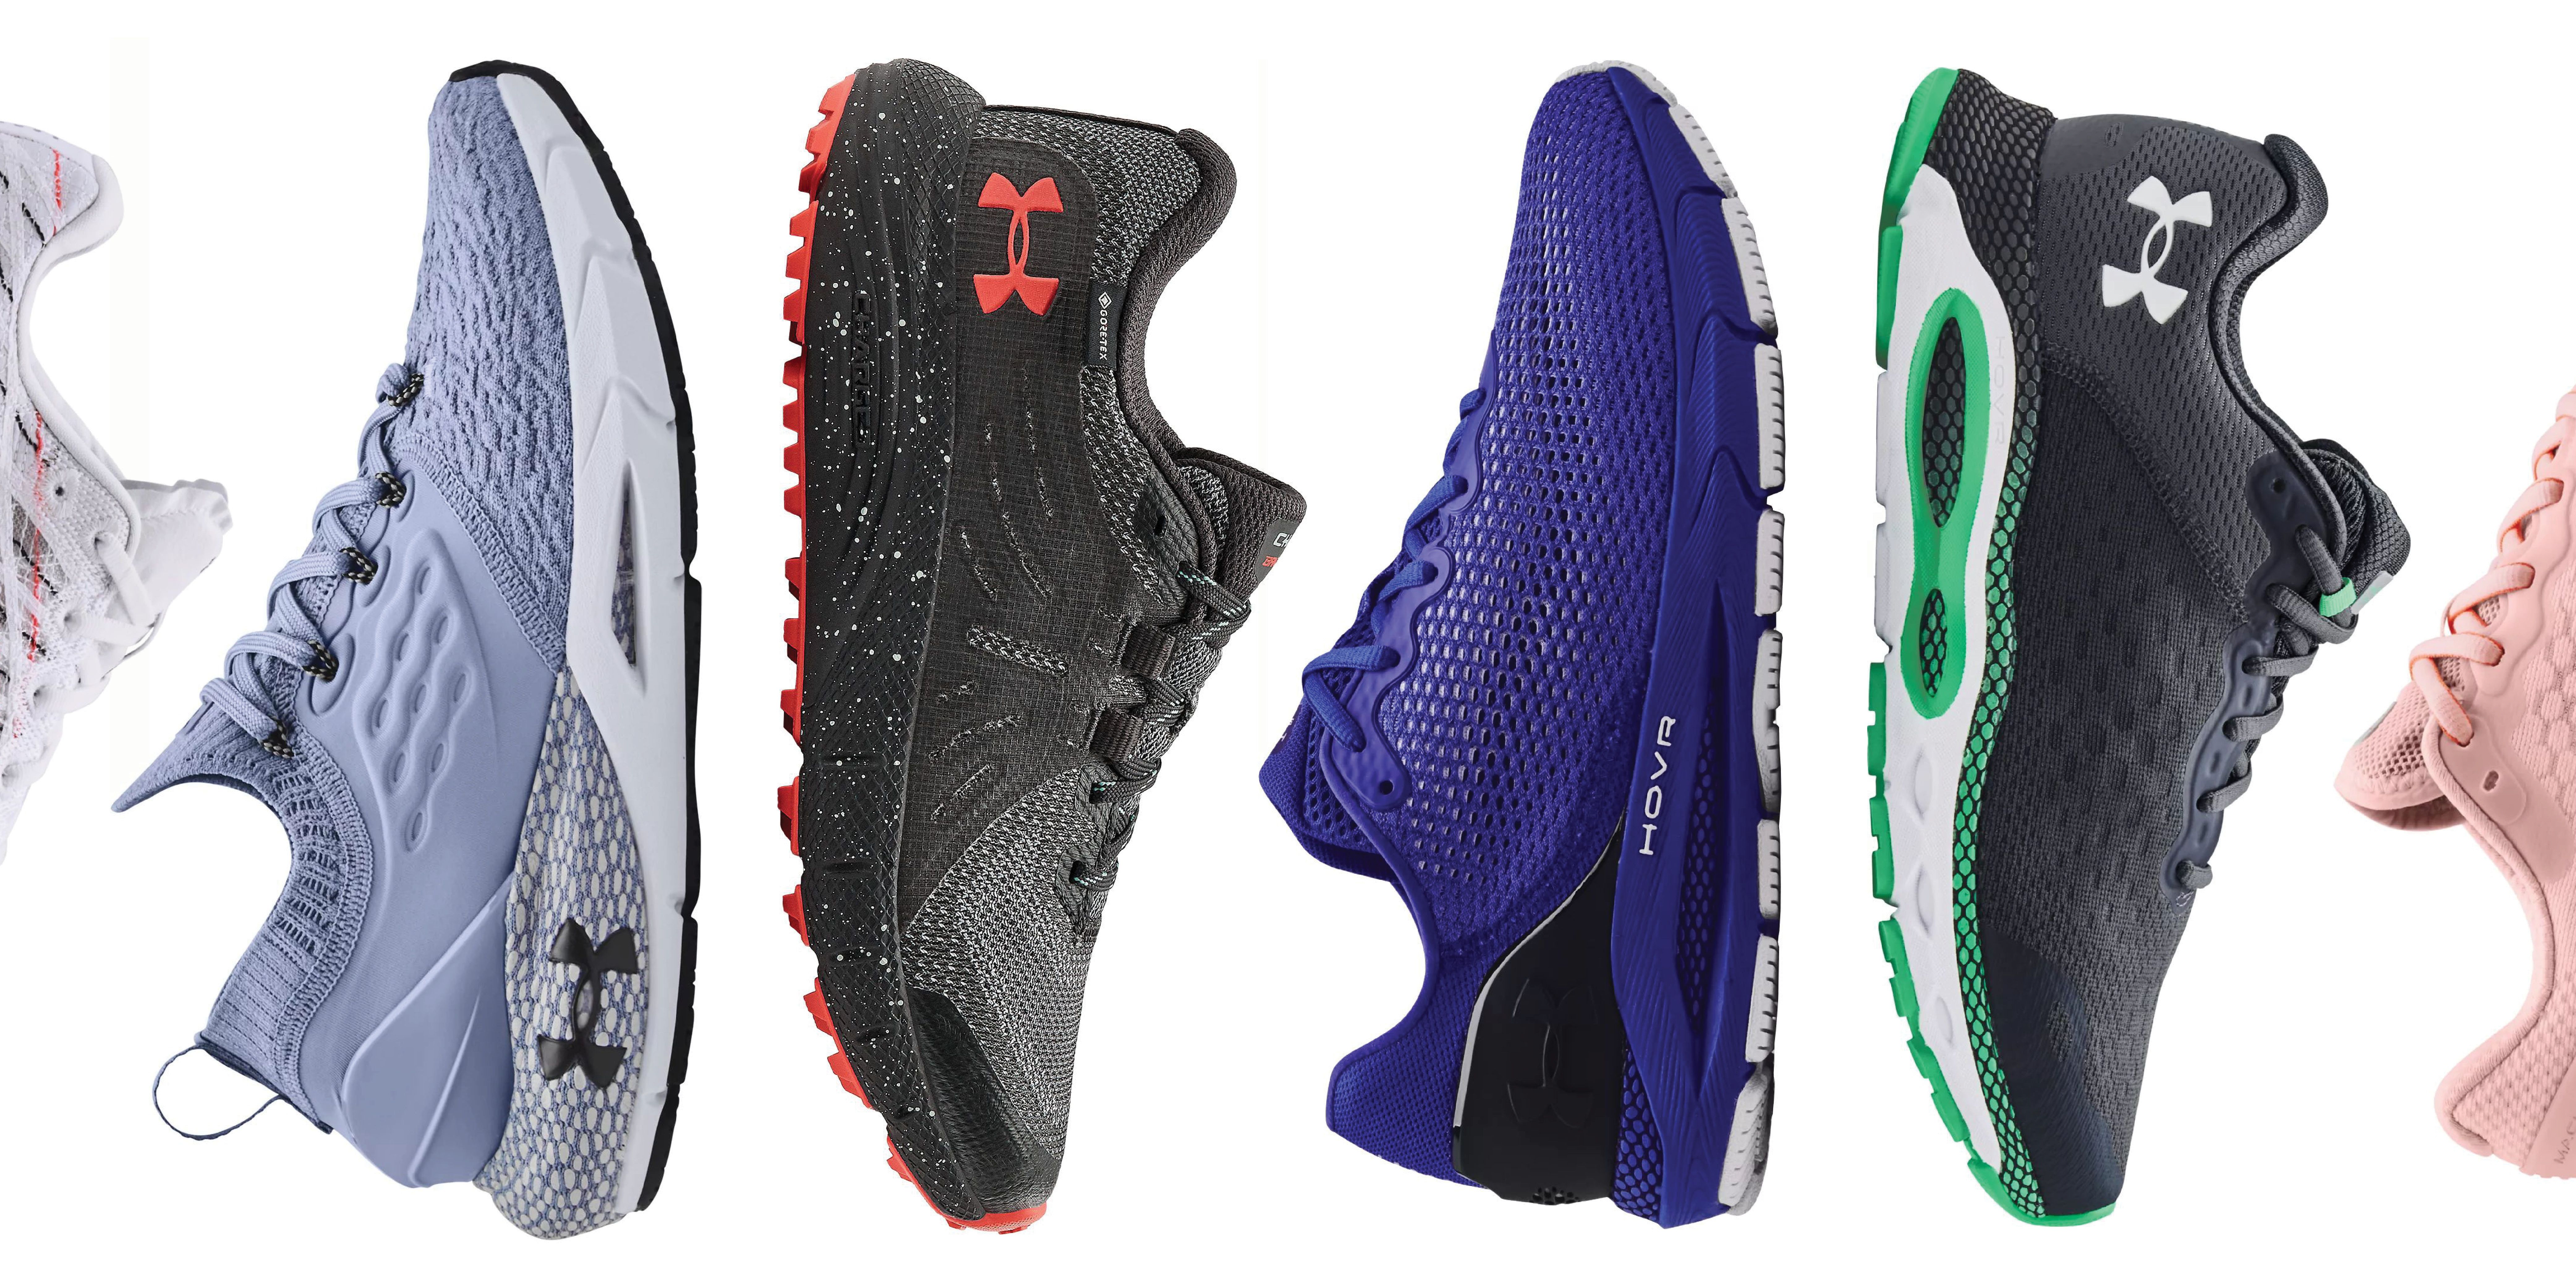 Under Armour Running Shoes 2021 | Best Under Armour Shoes